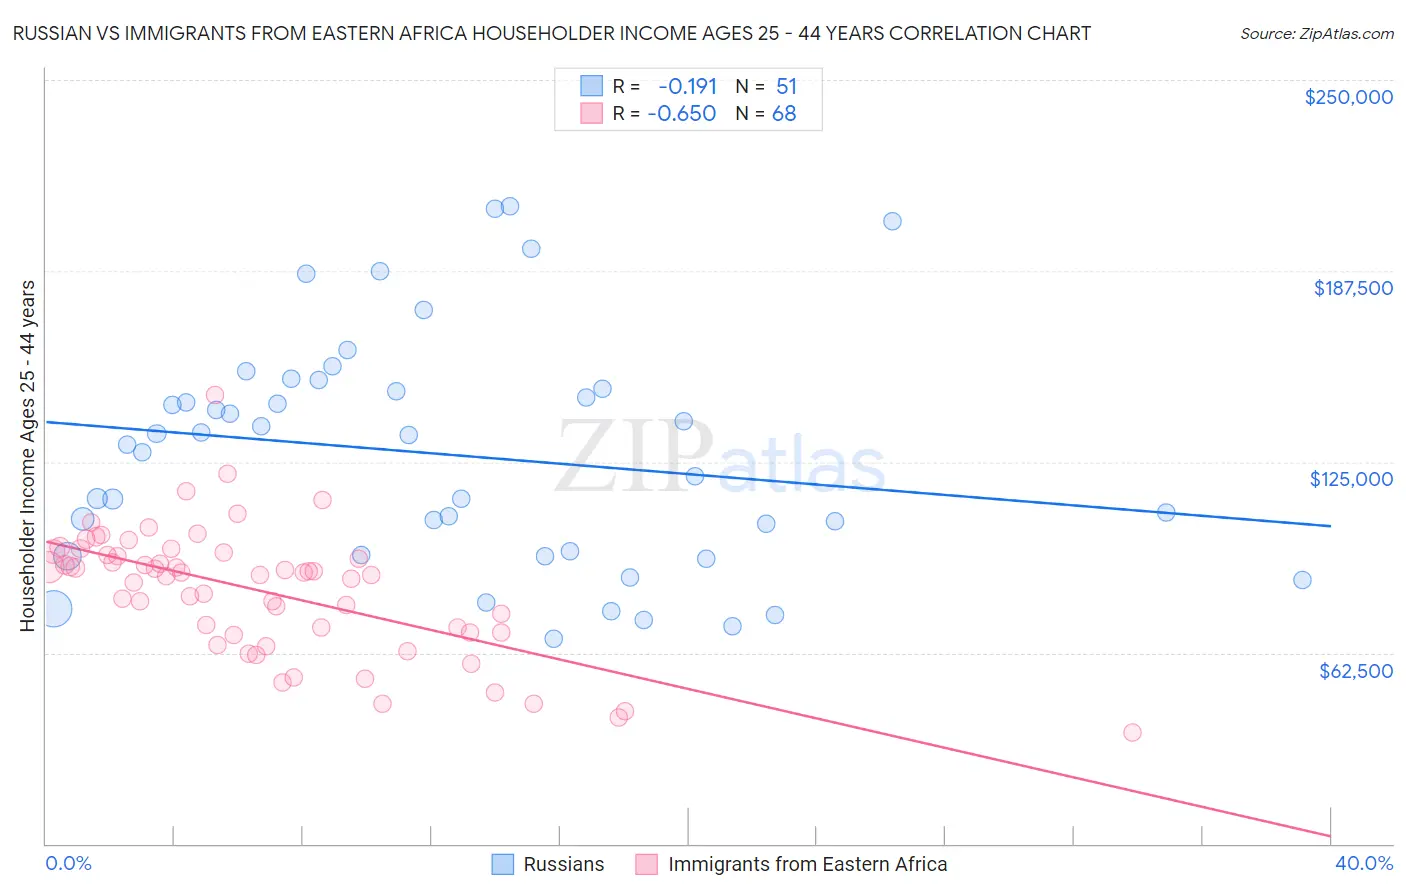 Russian vs Immigrants from Eastern Africa Householder Income Ages 25 - 44 years